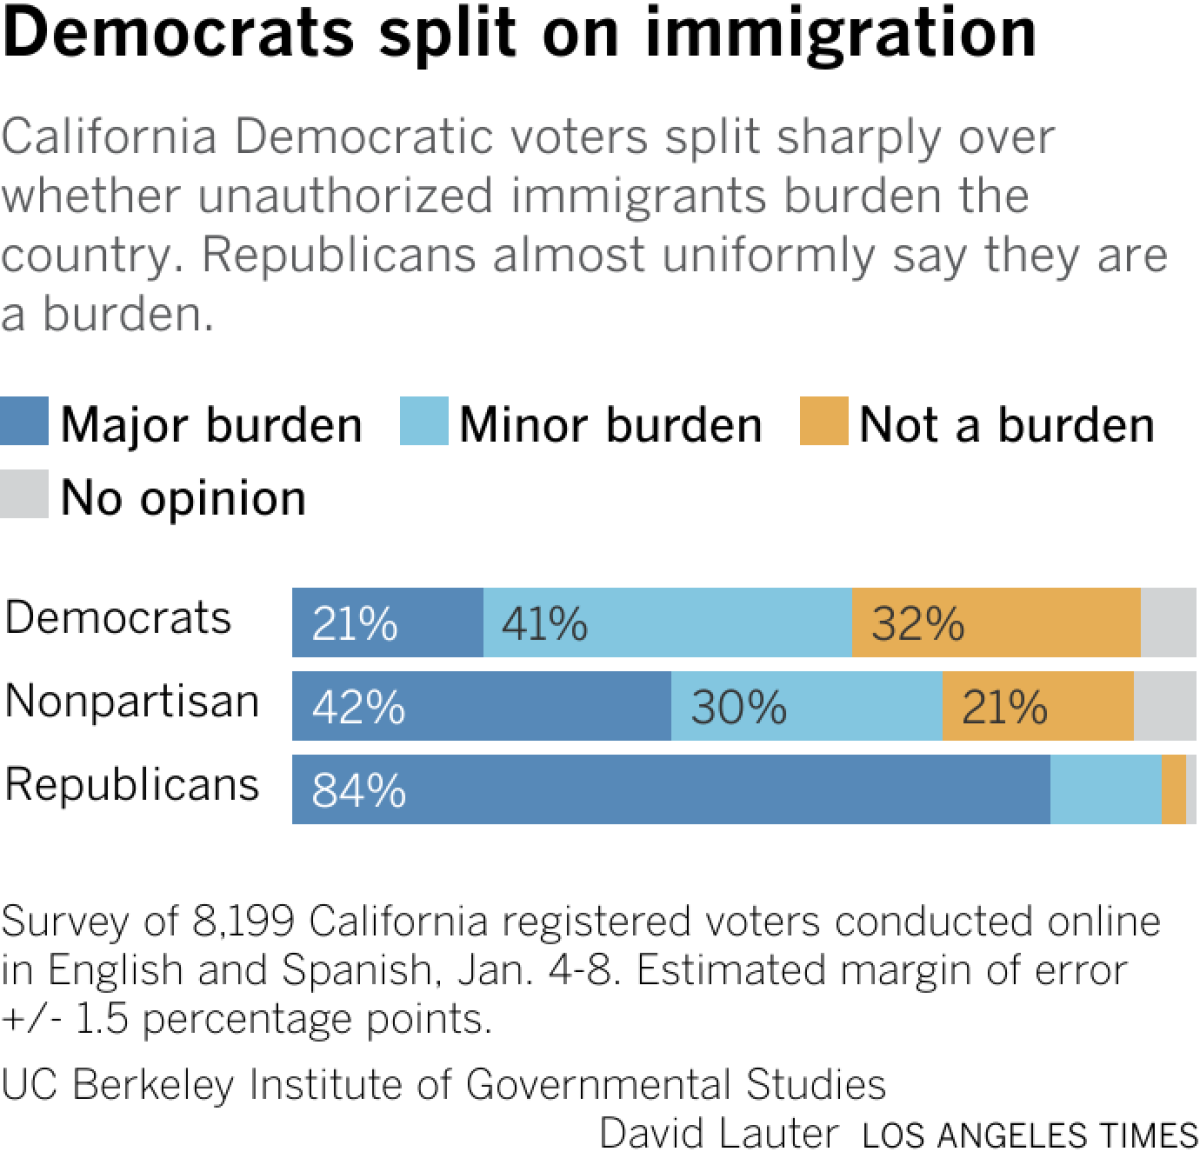 Horizontal bar chart showing how California Democratic, Republican and nonpartisan voters are divided on whether unauthorized immigrants burden the country. The chart shows Republicans overwhelmingly saying they are a burden, while Democrats are sharply divided.